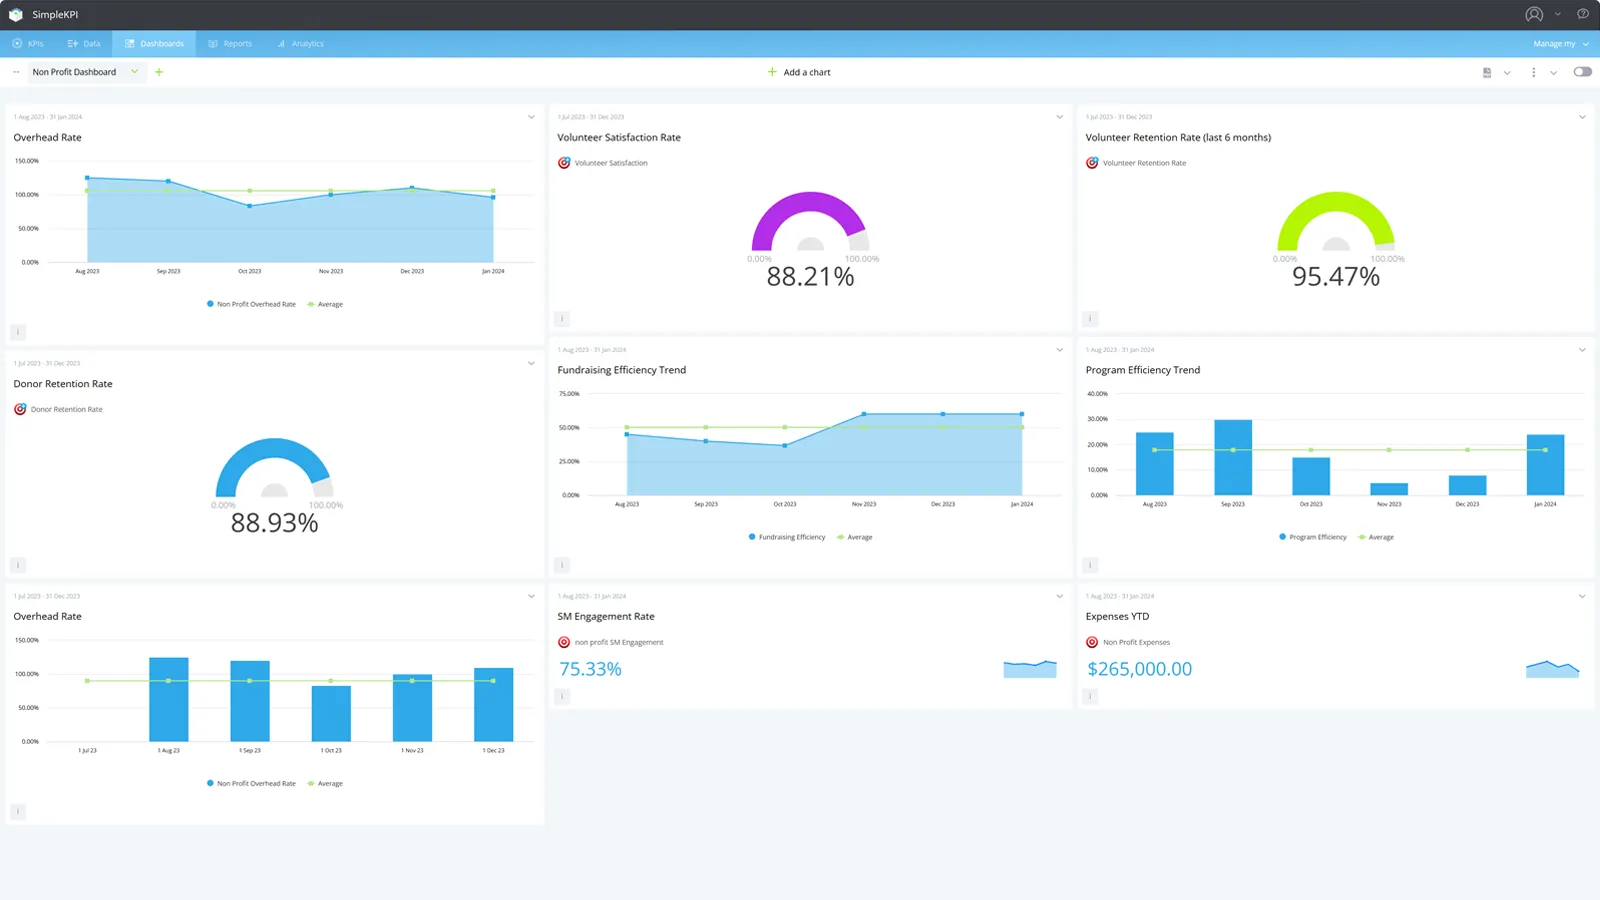 Non-profit focused KPI Dashboard Template displaying 9 charts on a light theme.